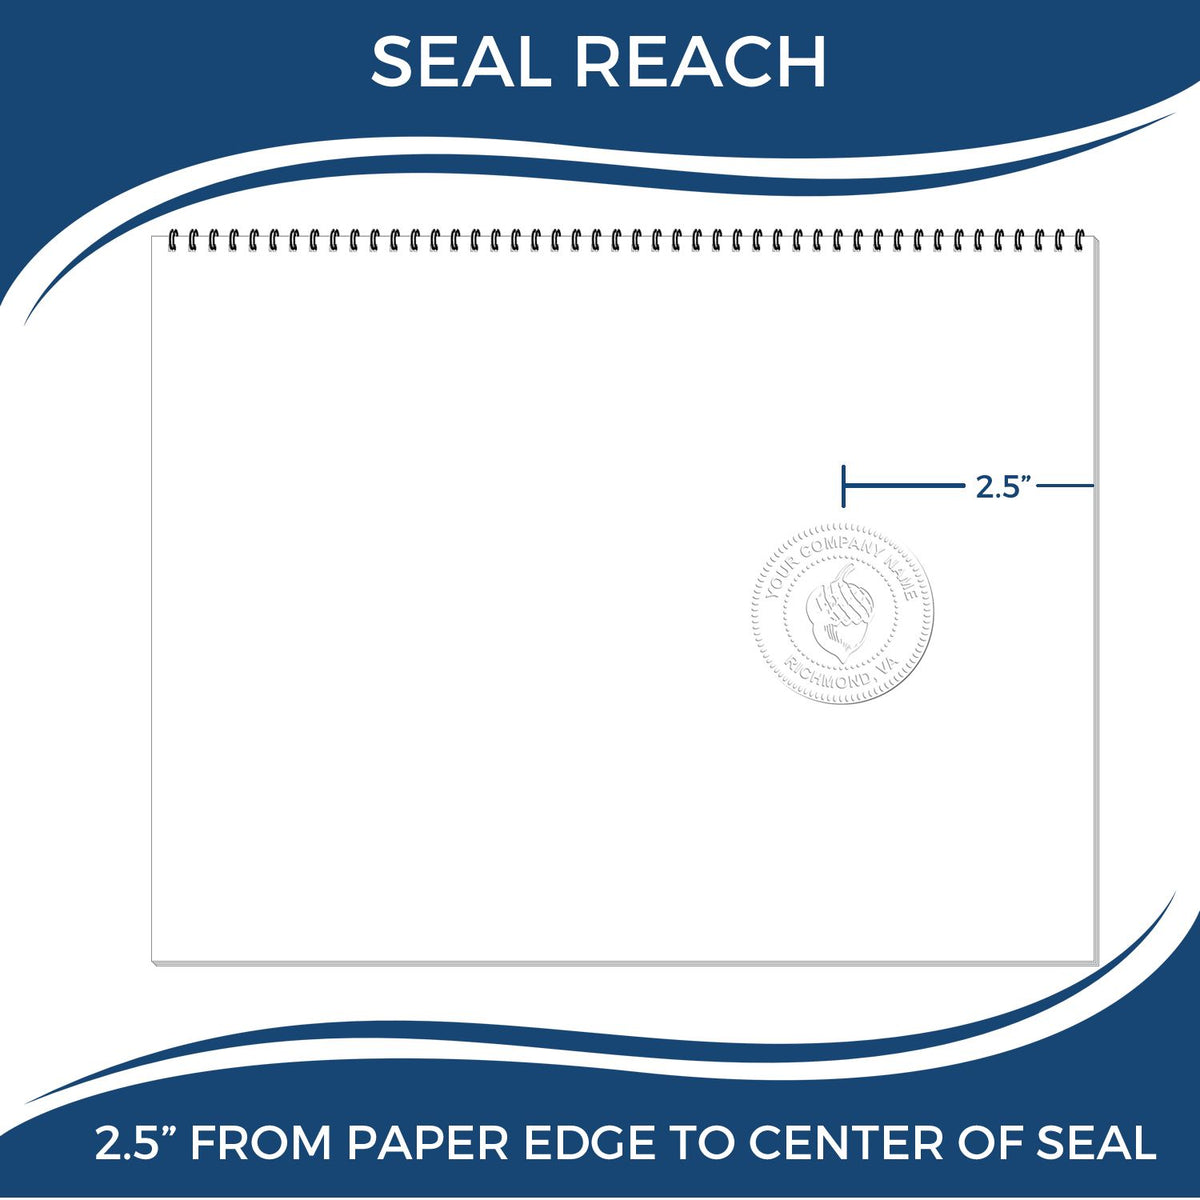 An infographic showing the seal reach which is represented by a ruler and a miniature seal image of the Heavy Duty Cast Iron Delaware Geologist Seal Embosser